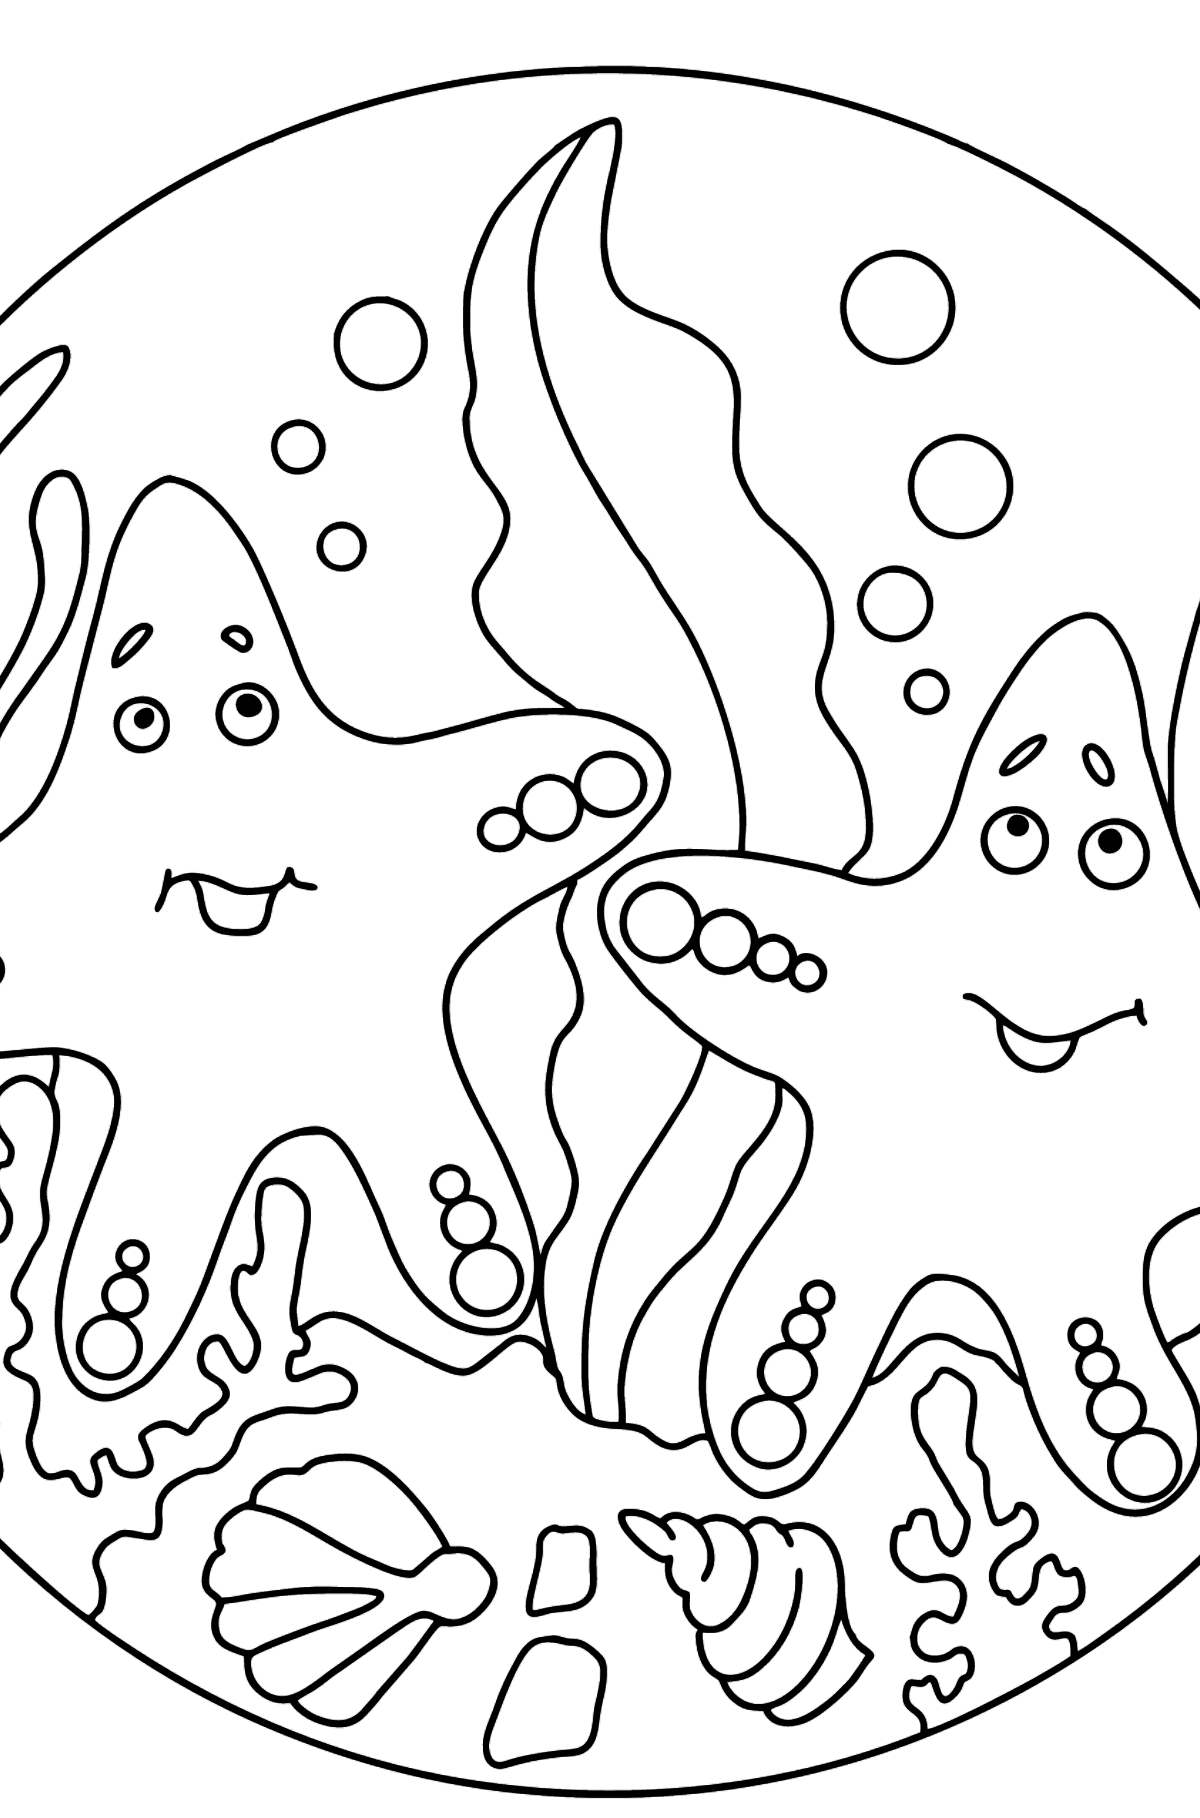 Two Starfish Coloring Page - Coloring Pages for Kids